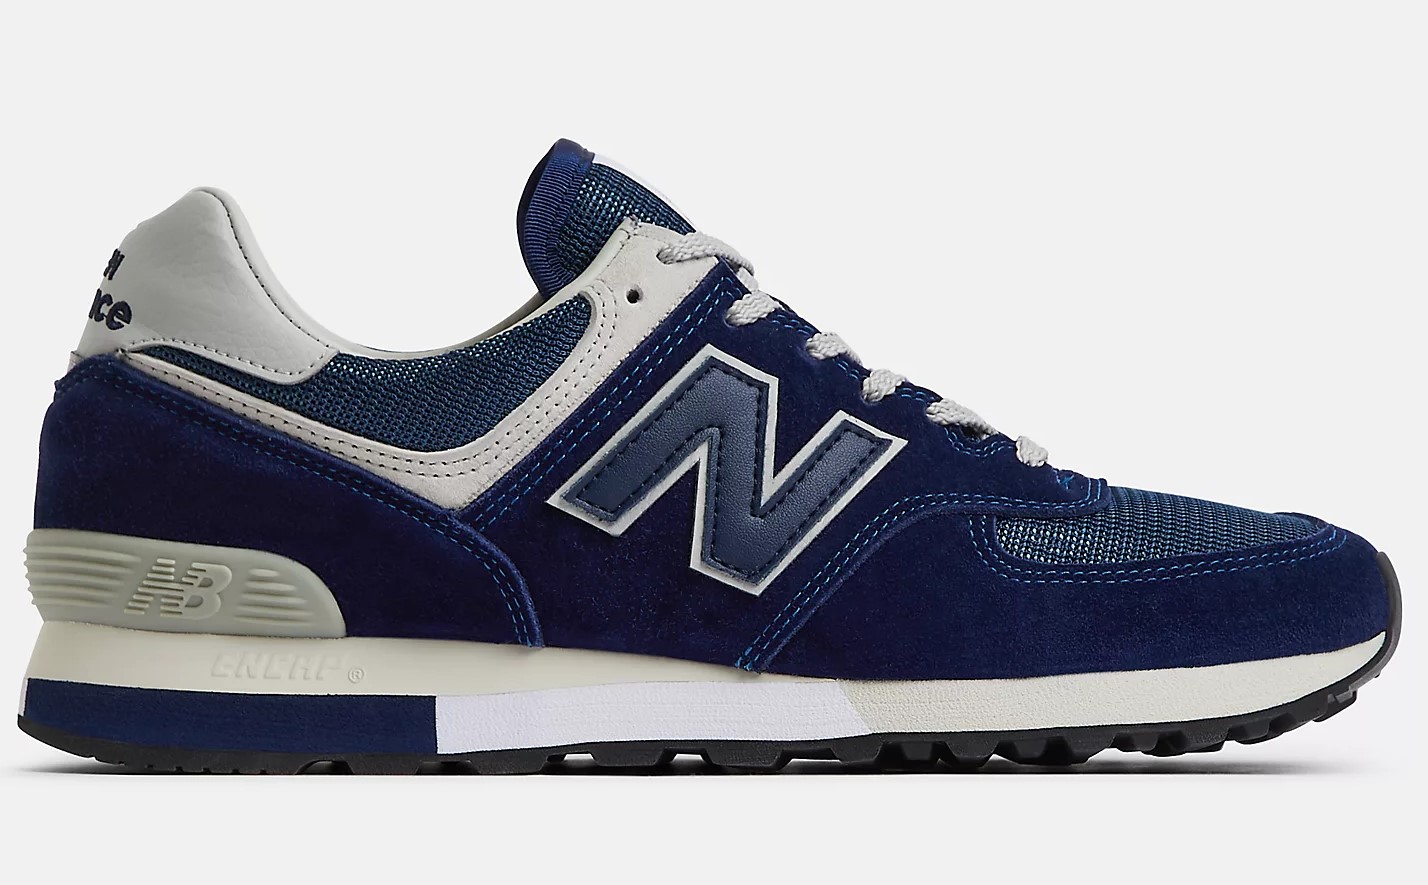 NEW BALANCE MADE in UK 576 35th Anniversary Baskets Basses Unisexe Medieval Blue avec Insignia Blue et 420 U